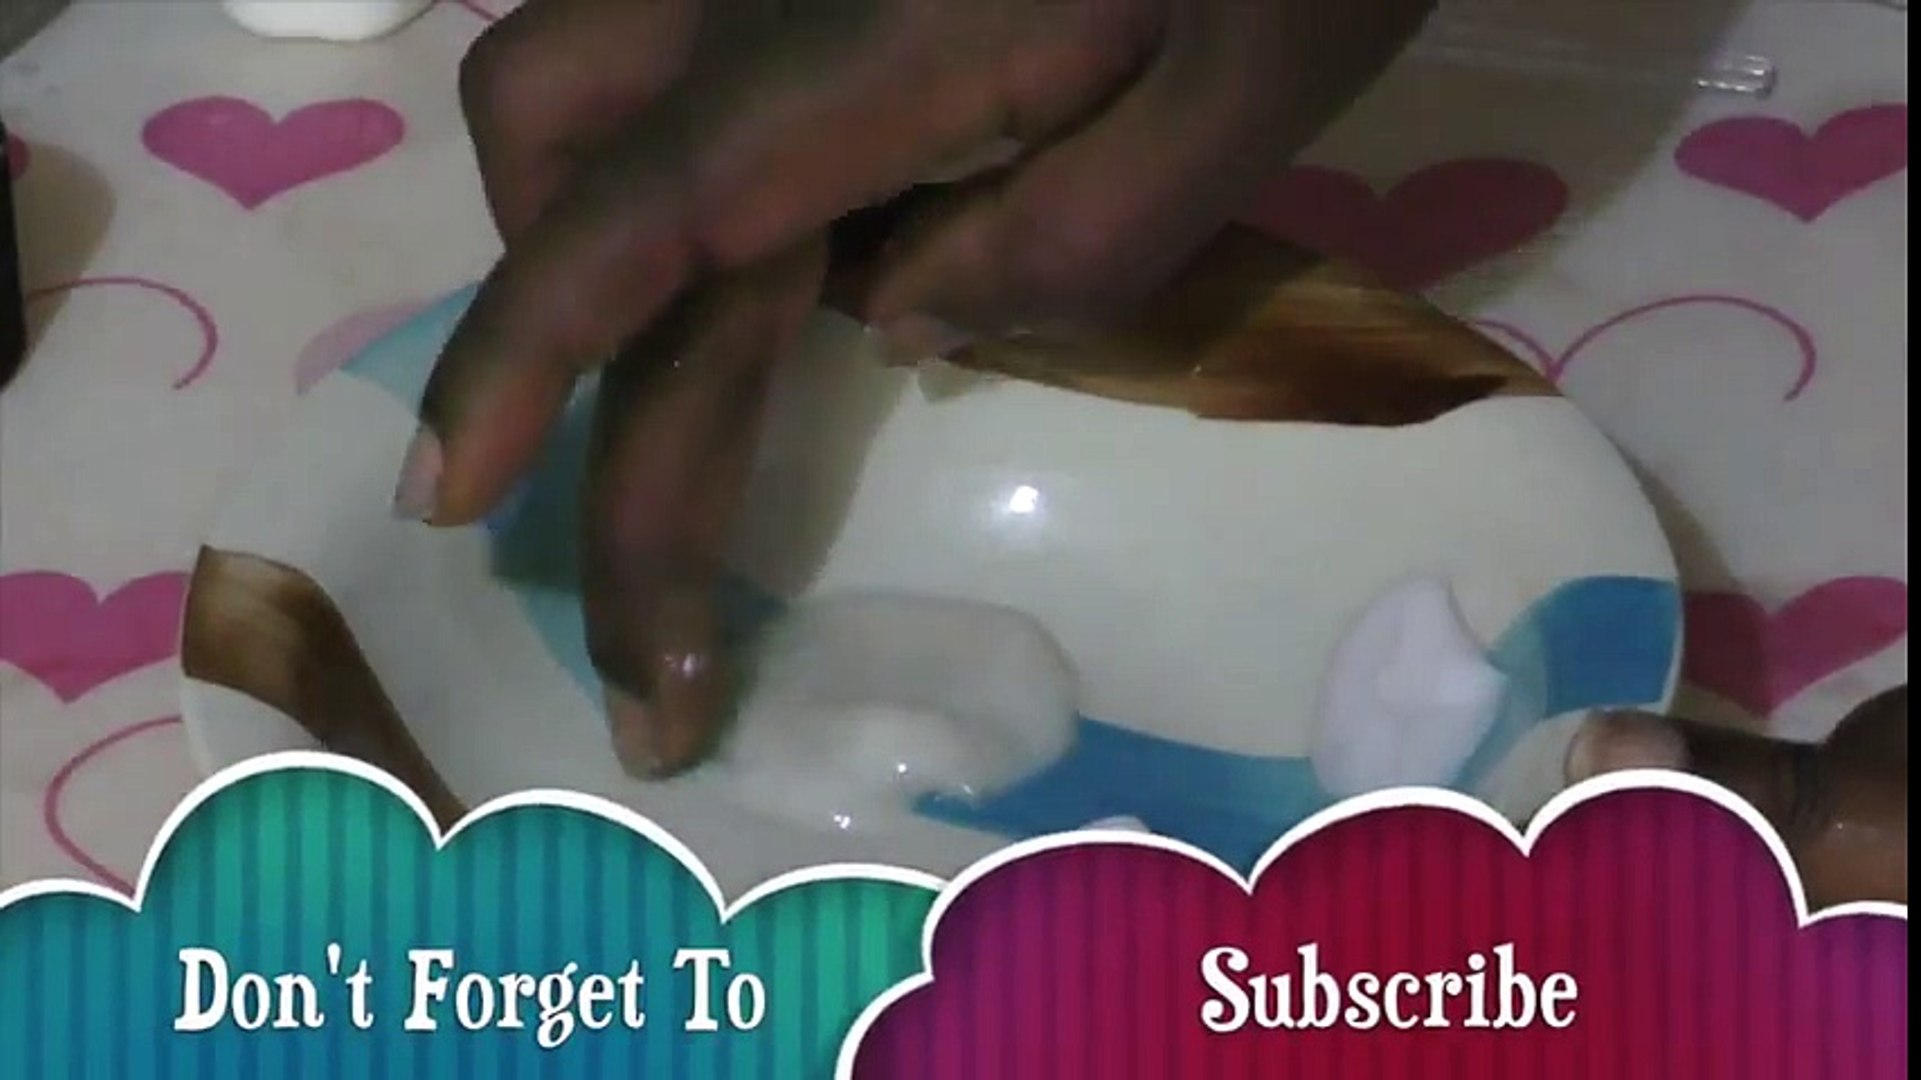 How To Fix Stickyrubbery Slime Without Activator Baking Sodacontact Solutionshaving Creamlotion